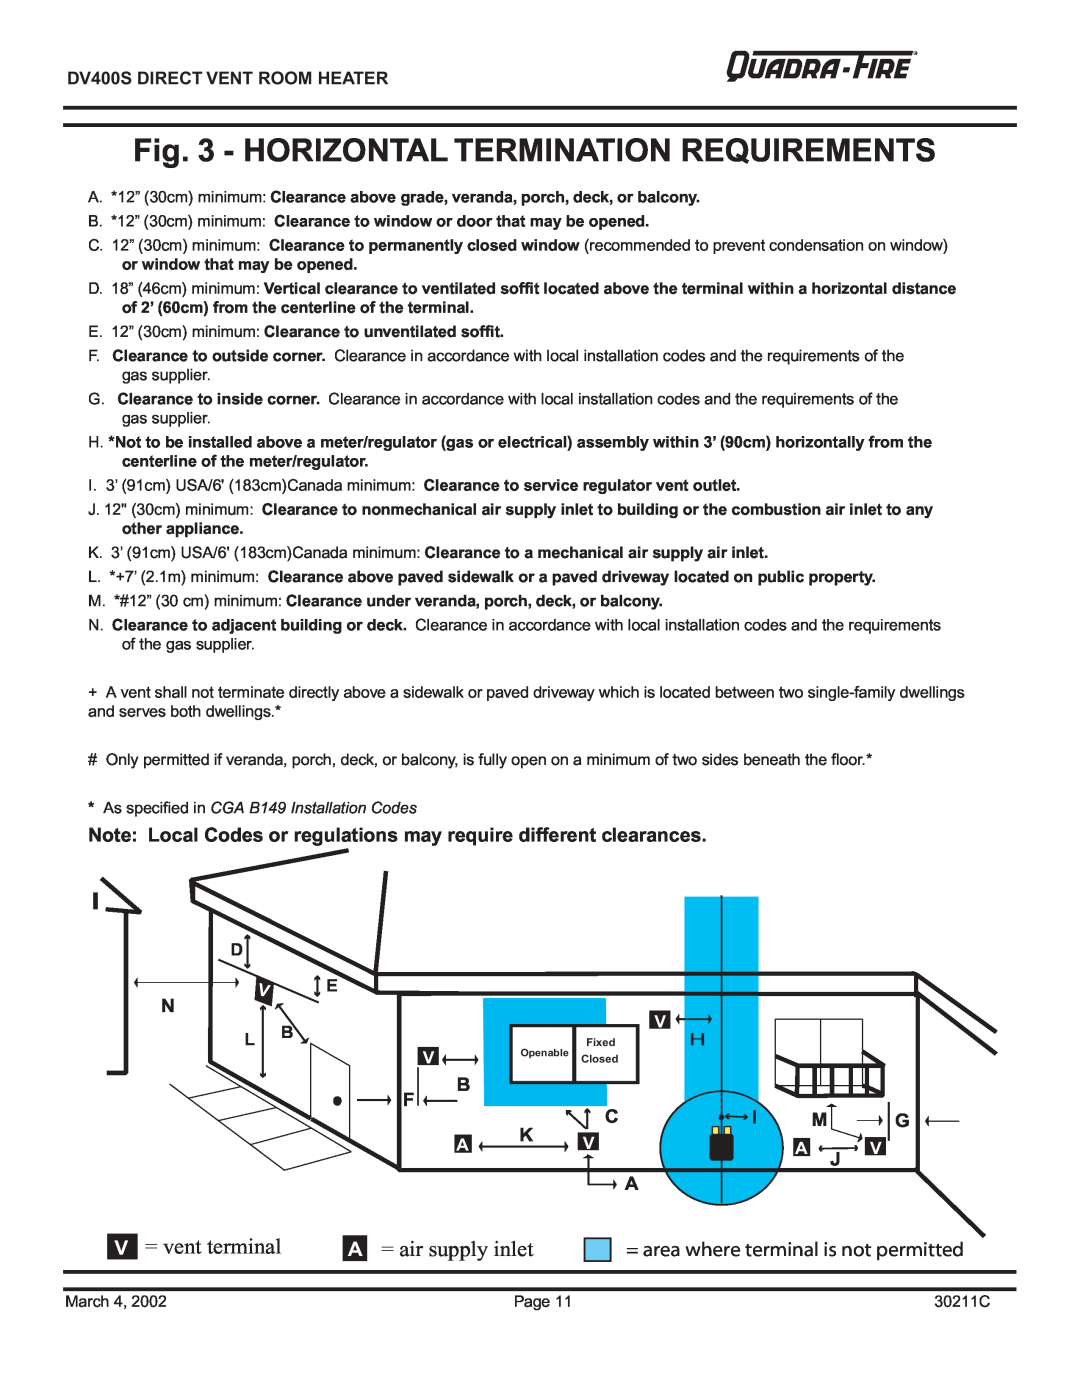 Quadra-Fire DV400S owner manual Horizontal Termination Requirements, V = vent terminal, A = air supply inlet 